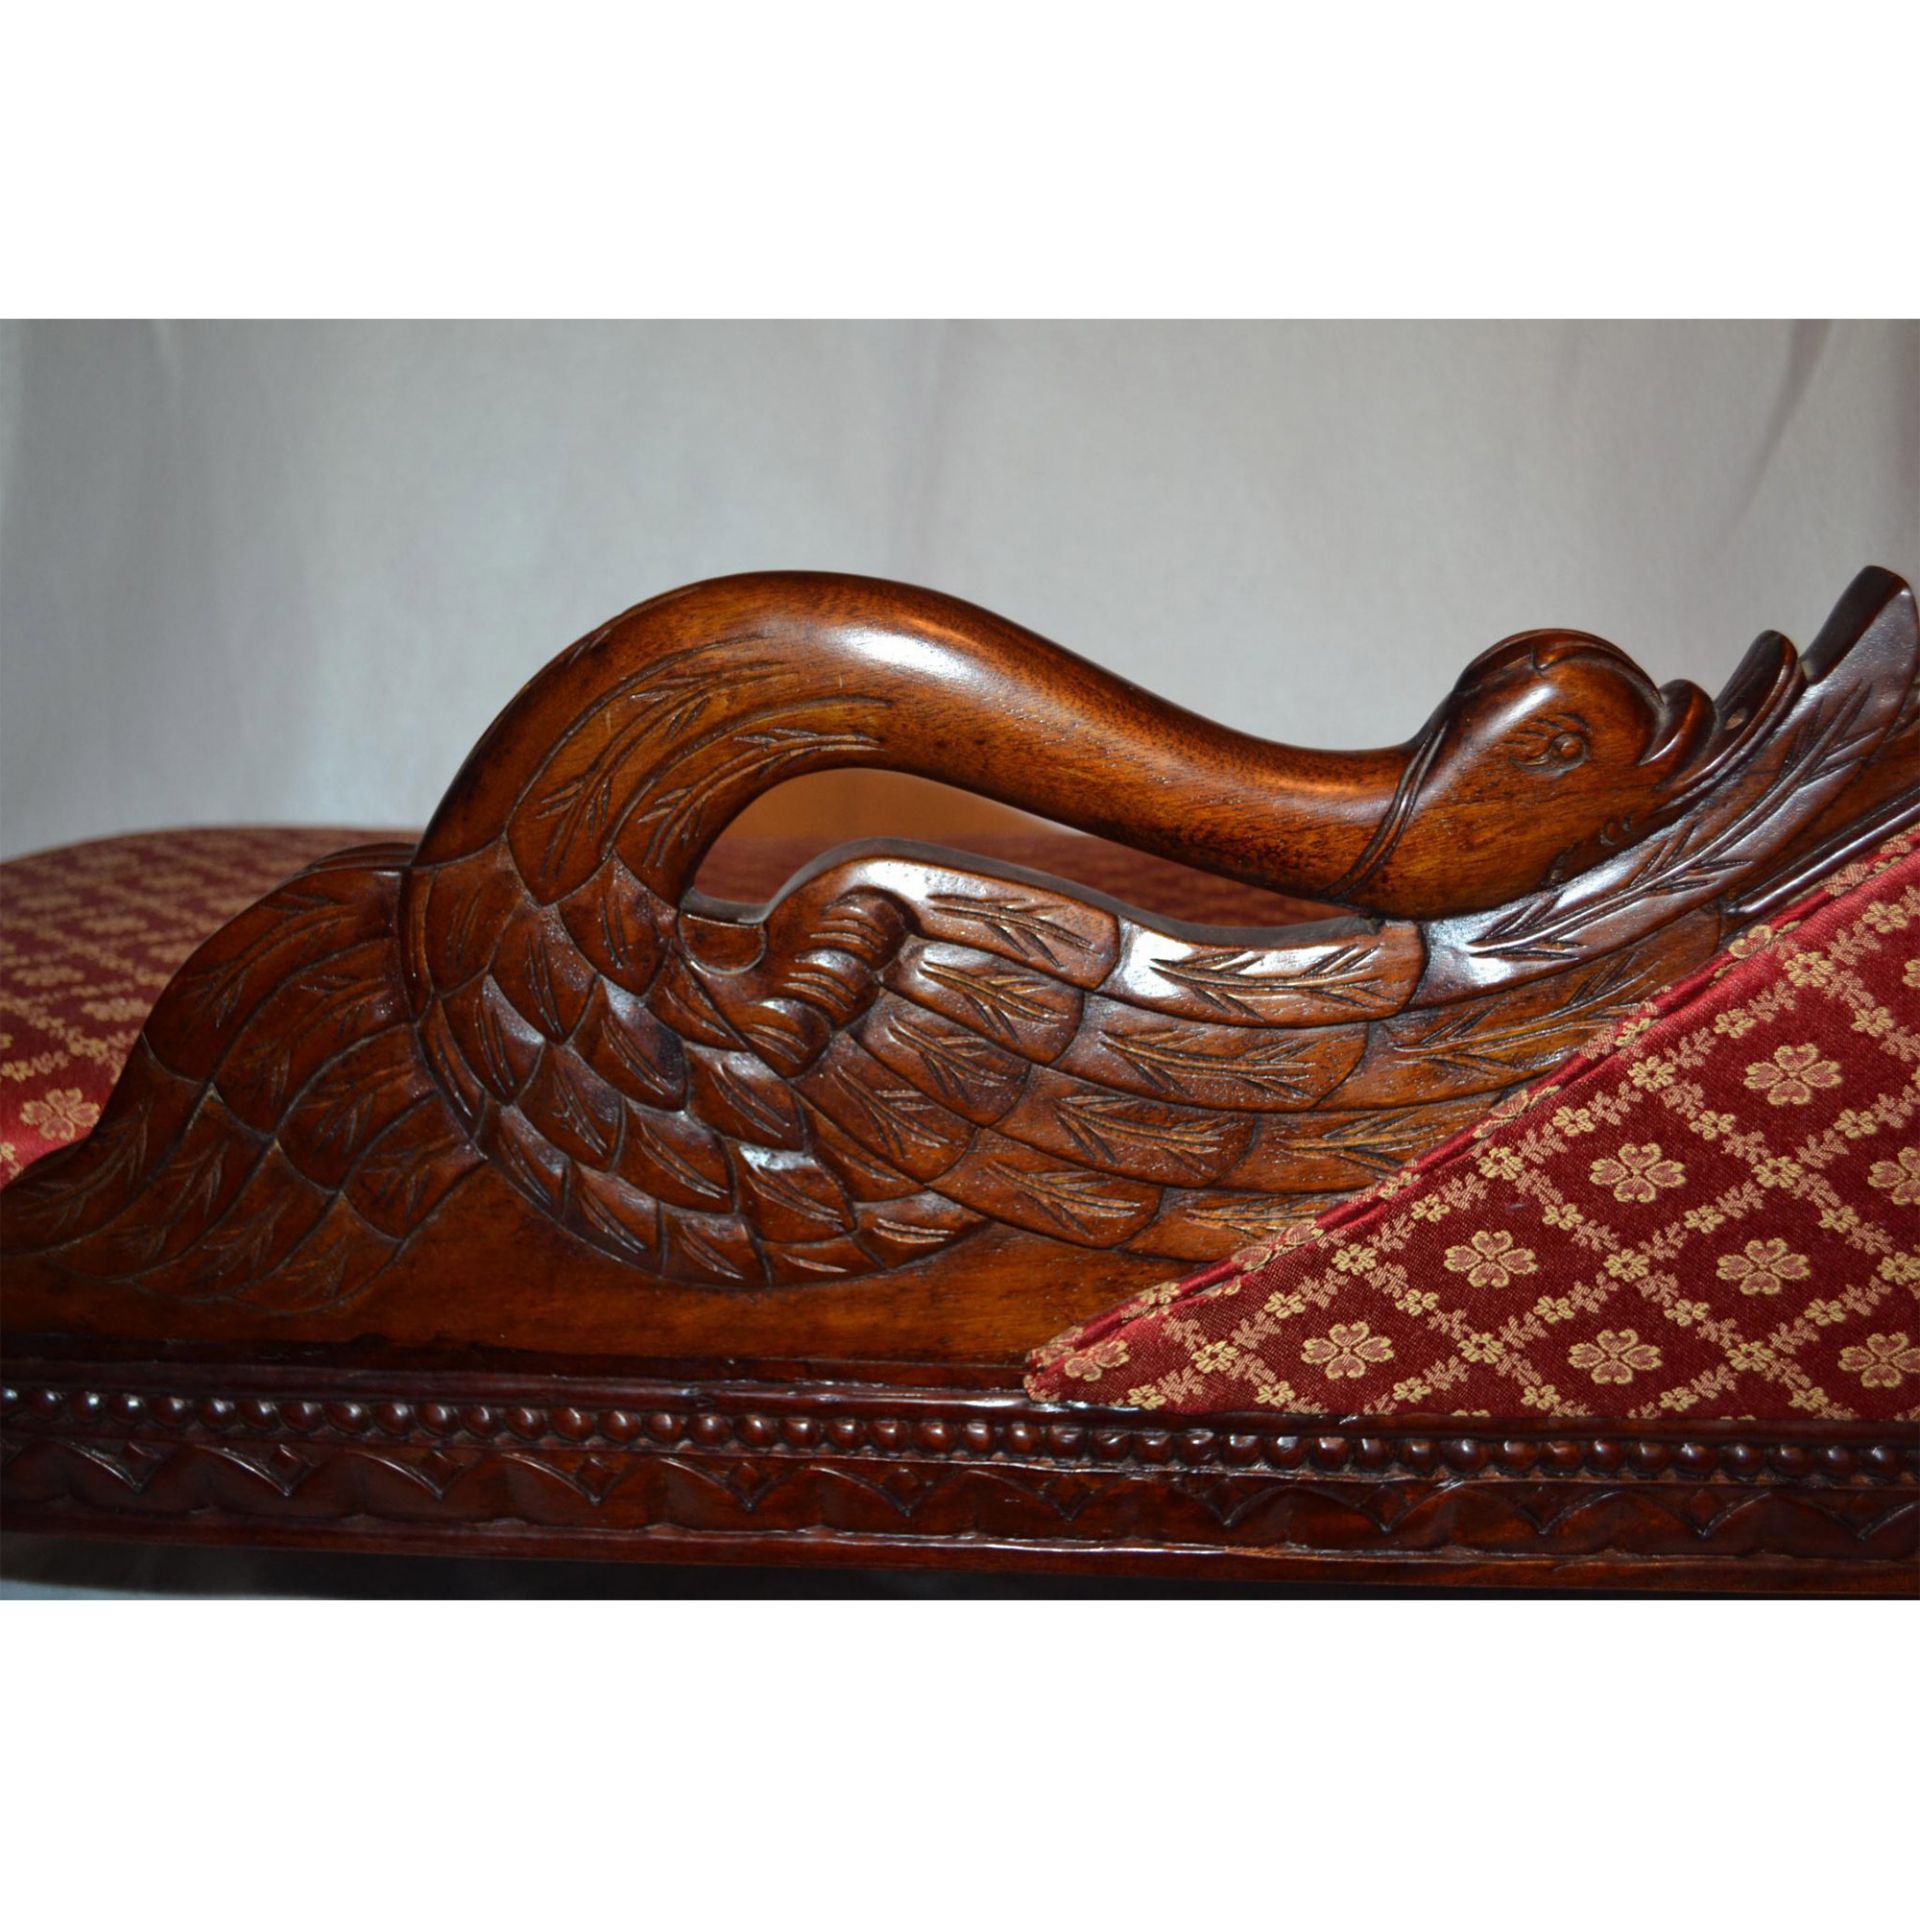 Miniature European Mahogany Hand Carved And Crafted Swan Sofa, Upholstered In Red/Gold Pattern Damas - Image 4 of 5